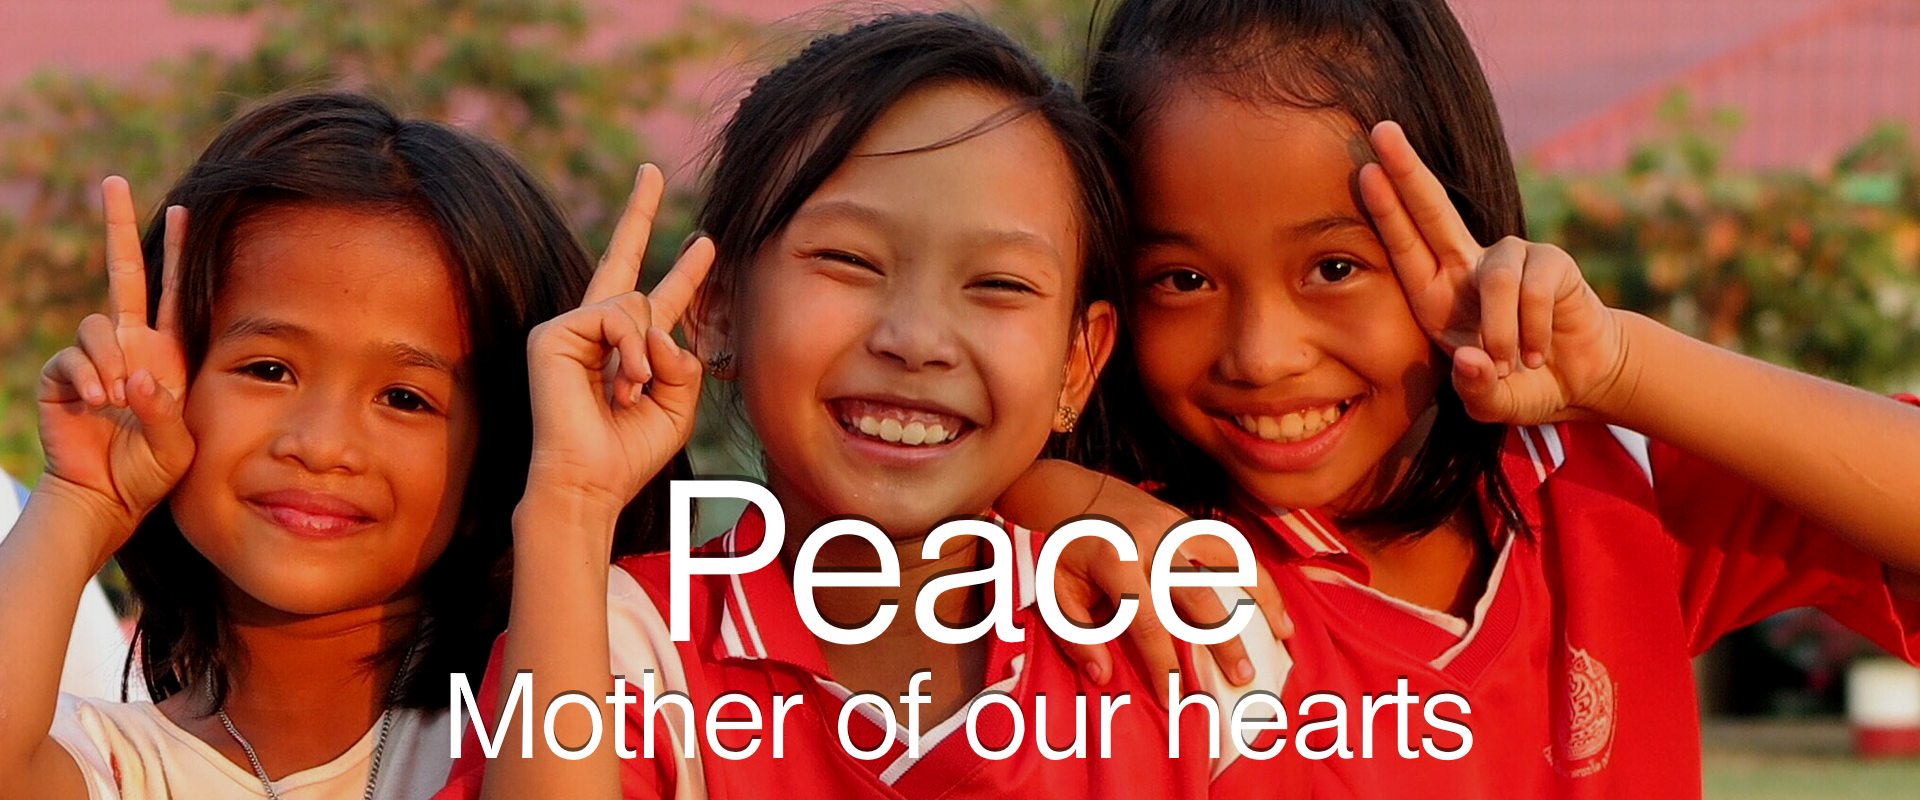 Peace - Mother of our hearts